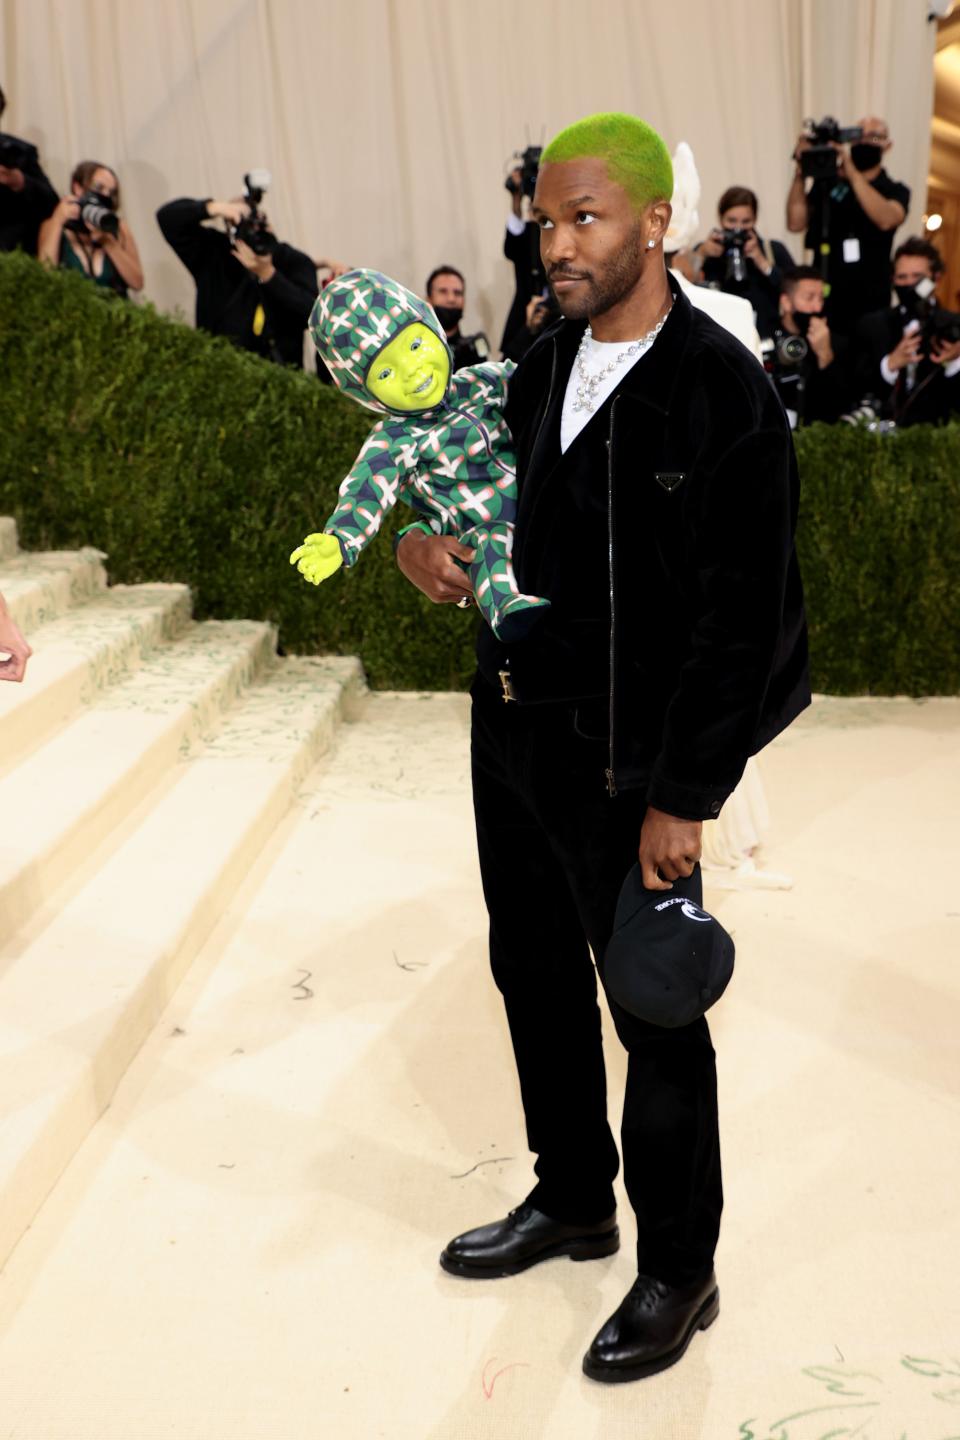 Why did Frank Ocean bring a neon green baby robot to the 2021 Met Gala? The moving, blinking, and animatronic doll was inspired by, in Frank's words, “movie magic” and “America.” Alrighty, then!